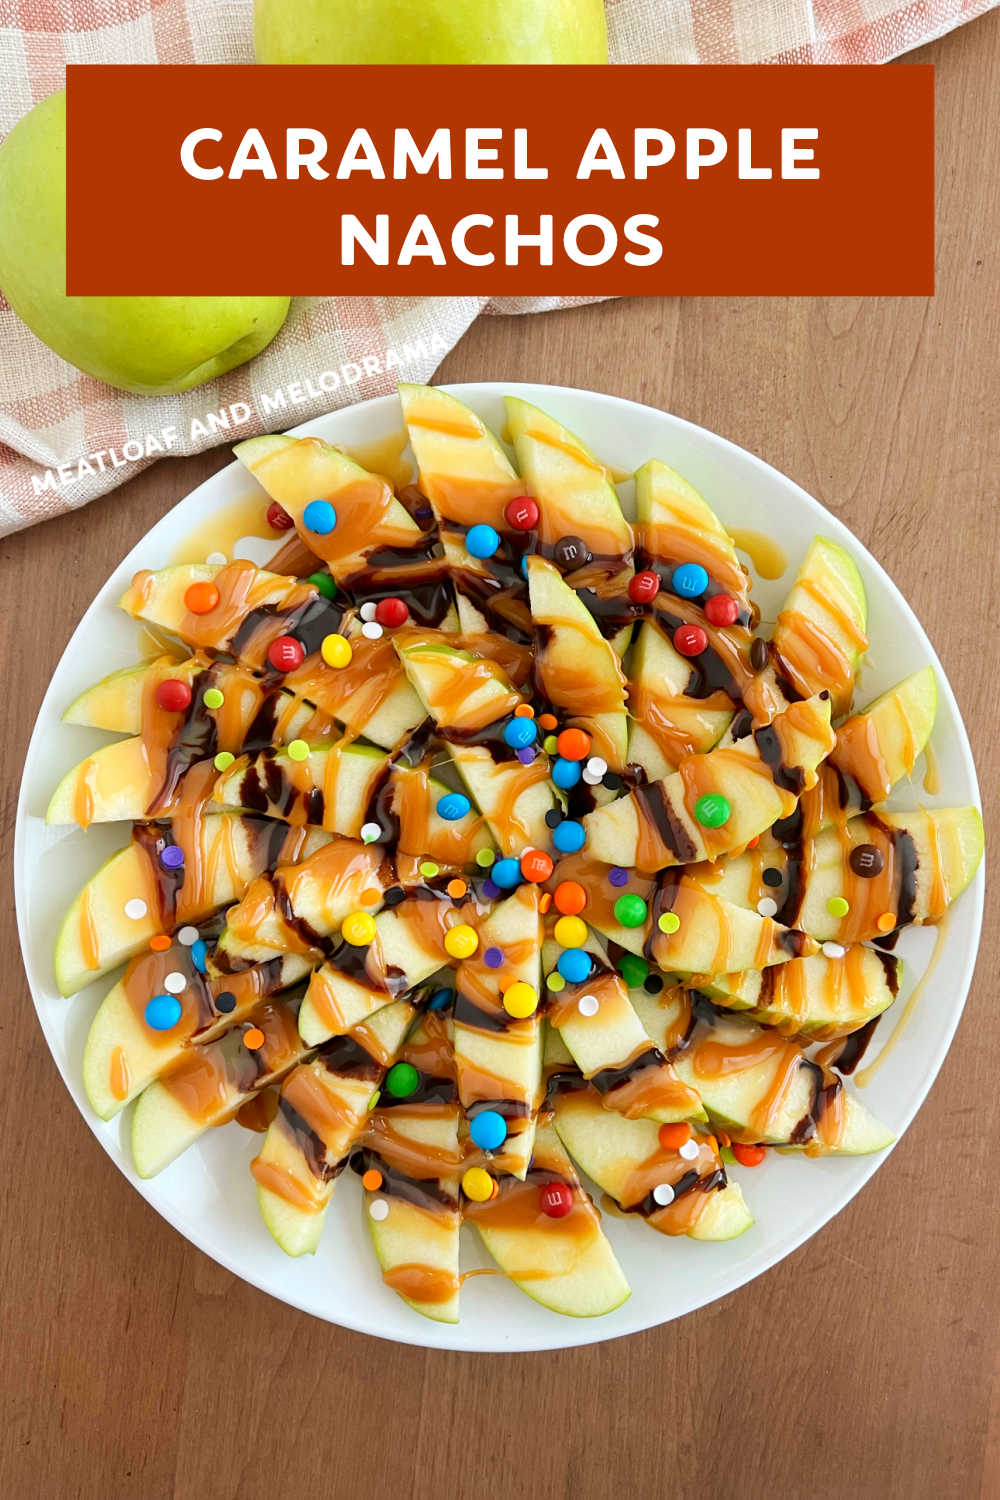 This easy Caramel Apple Nachos recipe uses apple slices and caramel sauce to make a delicious fall treat. Easier than traditional caramel apples and less mess! via @meamel